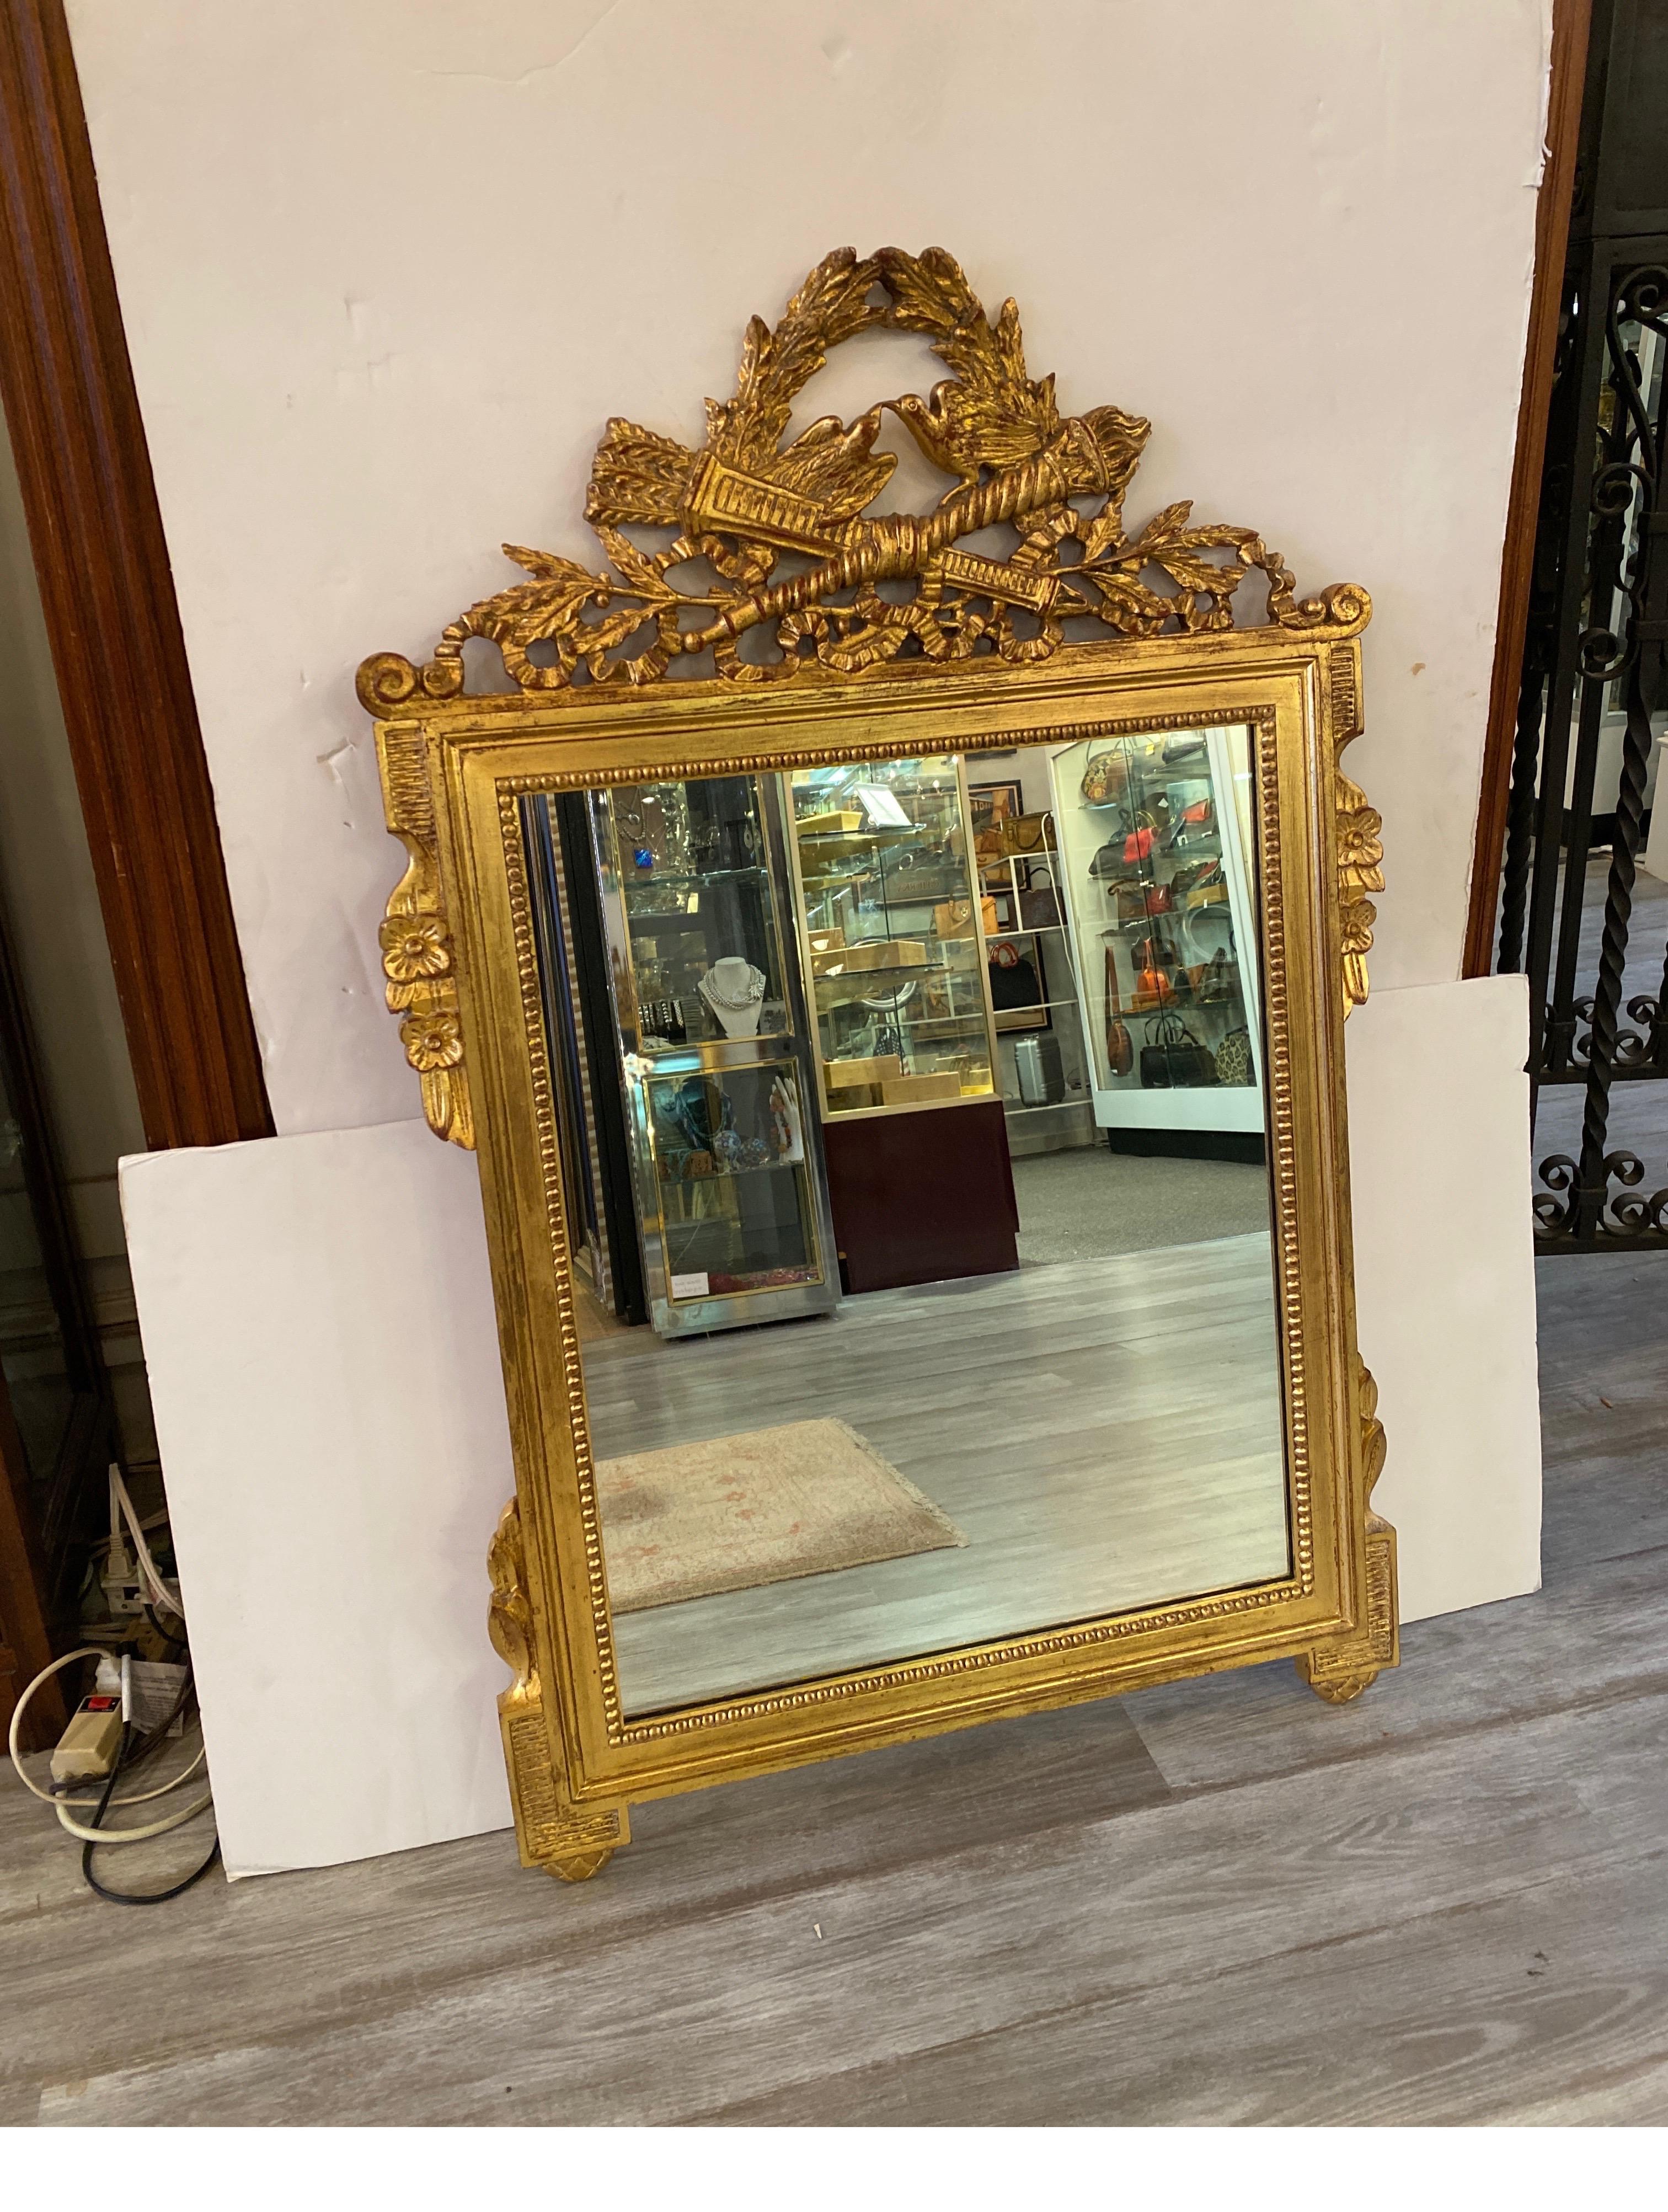 Stunning real gilt wood mirror made in Italy by Padillo for Kindel Furniture.
Beautiful mirror!  This well designed piece by Palladio is made of hand carved wood with a gold gilt finish. It depicts laurel leaf designs with eagles, ribbons and